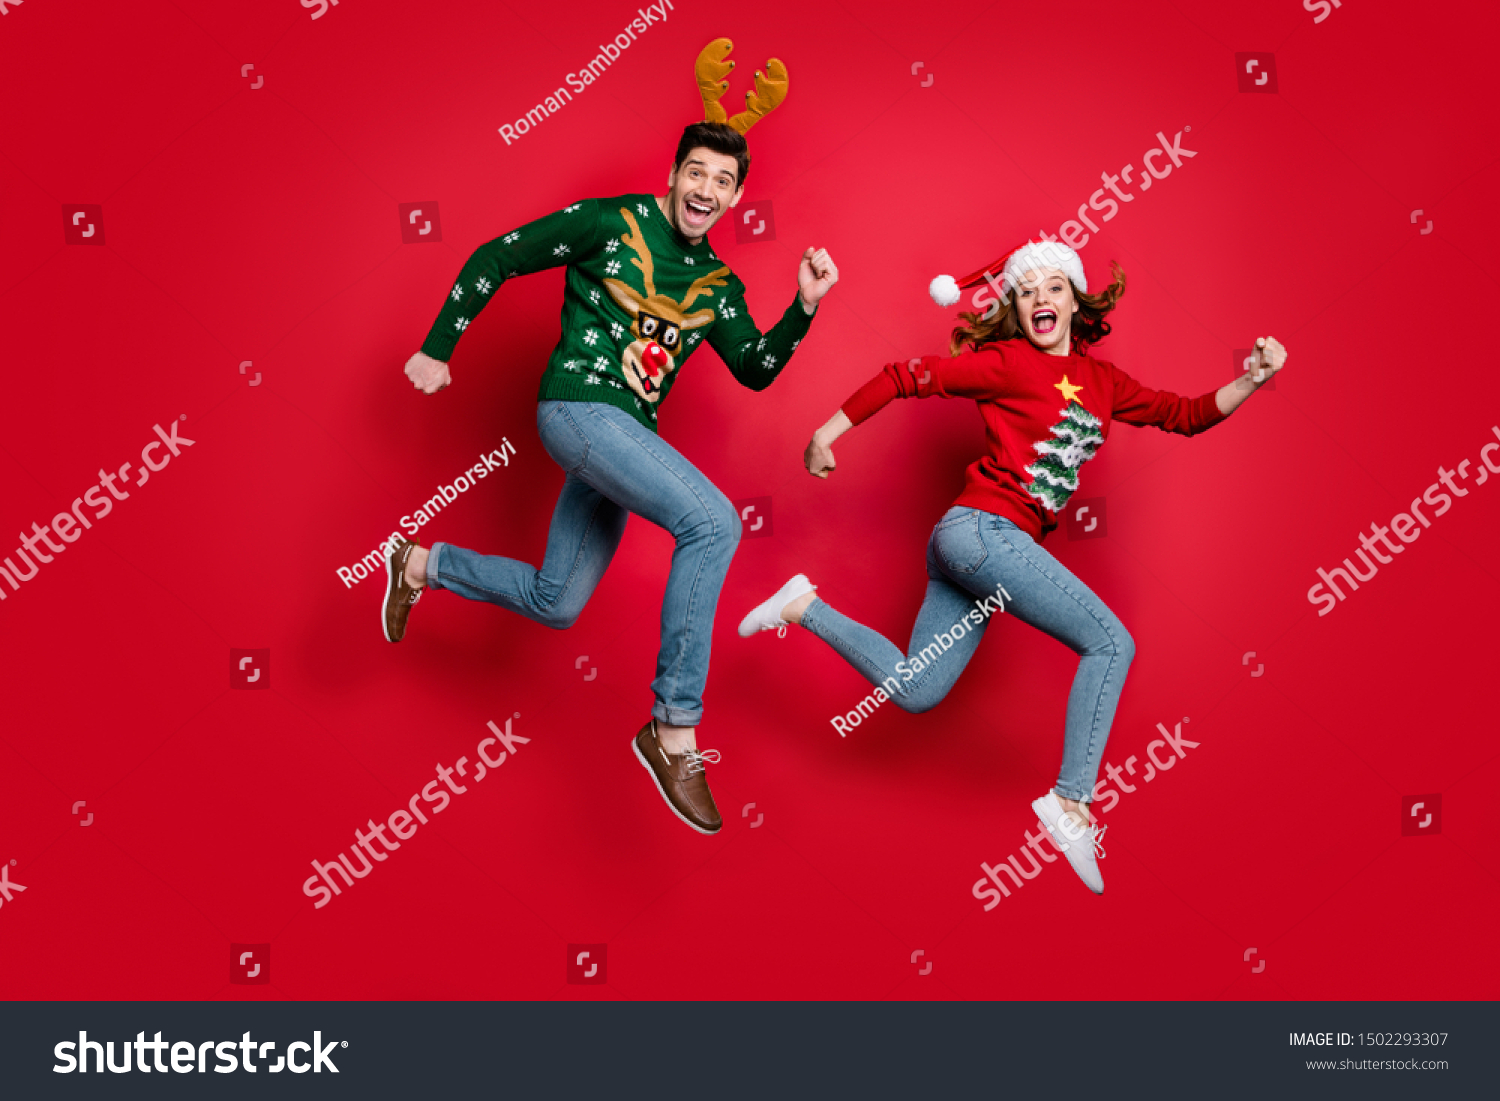 Full length photo of crazy jumping couple excited by x-mas discounts prices wear ugly ornament jumpers isolated red color background #1502293307